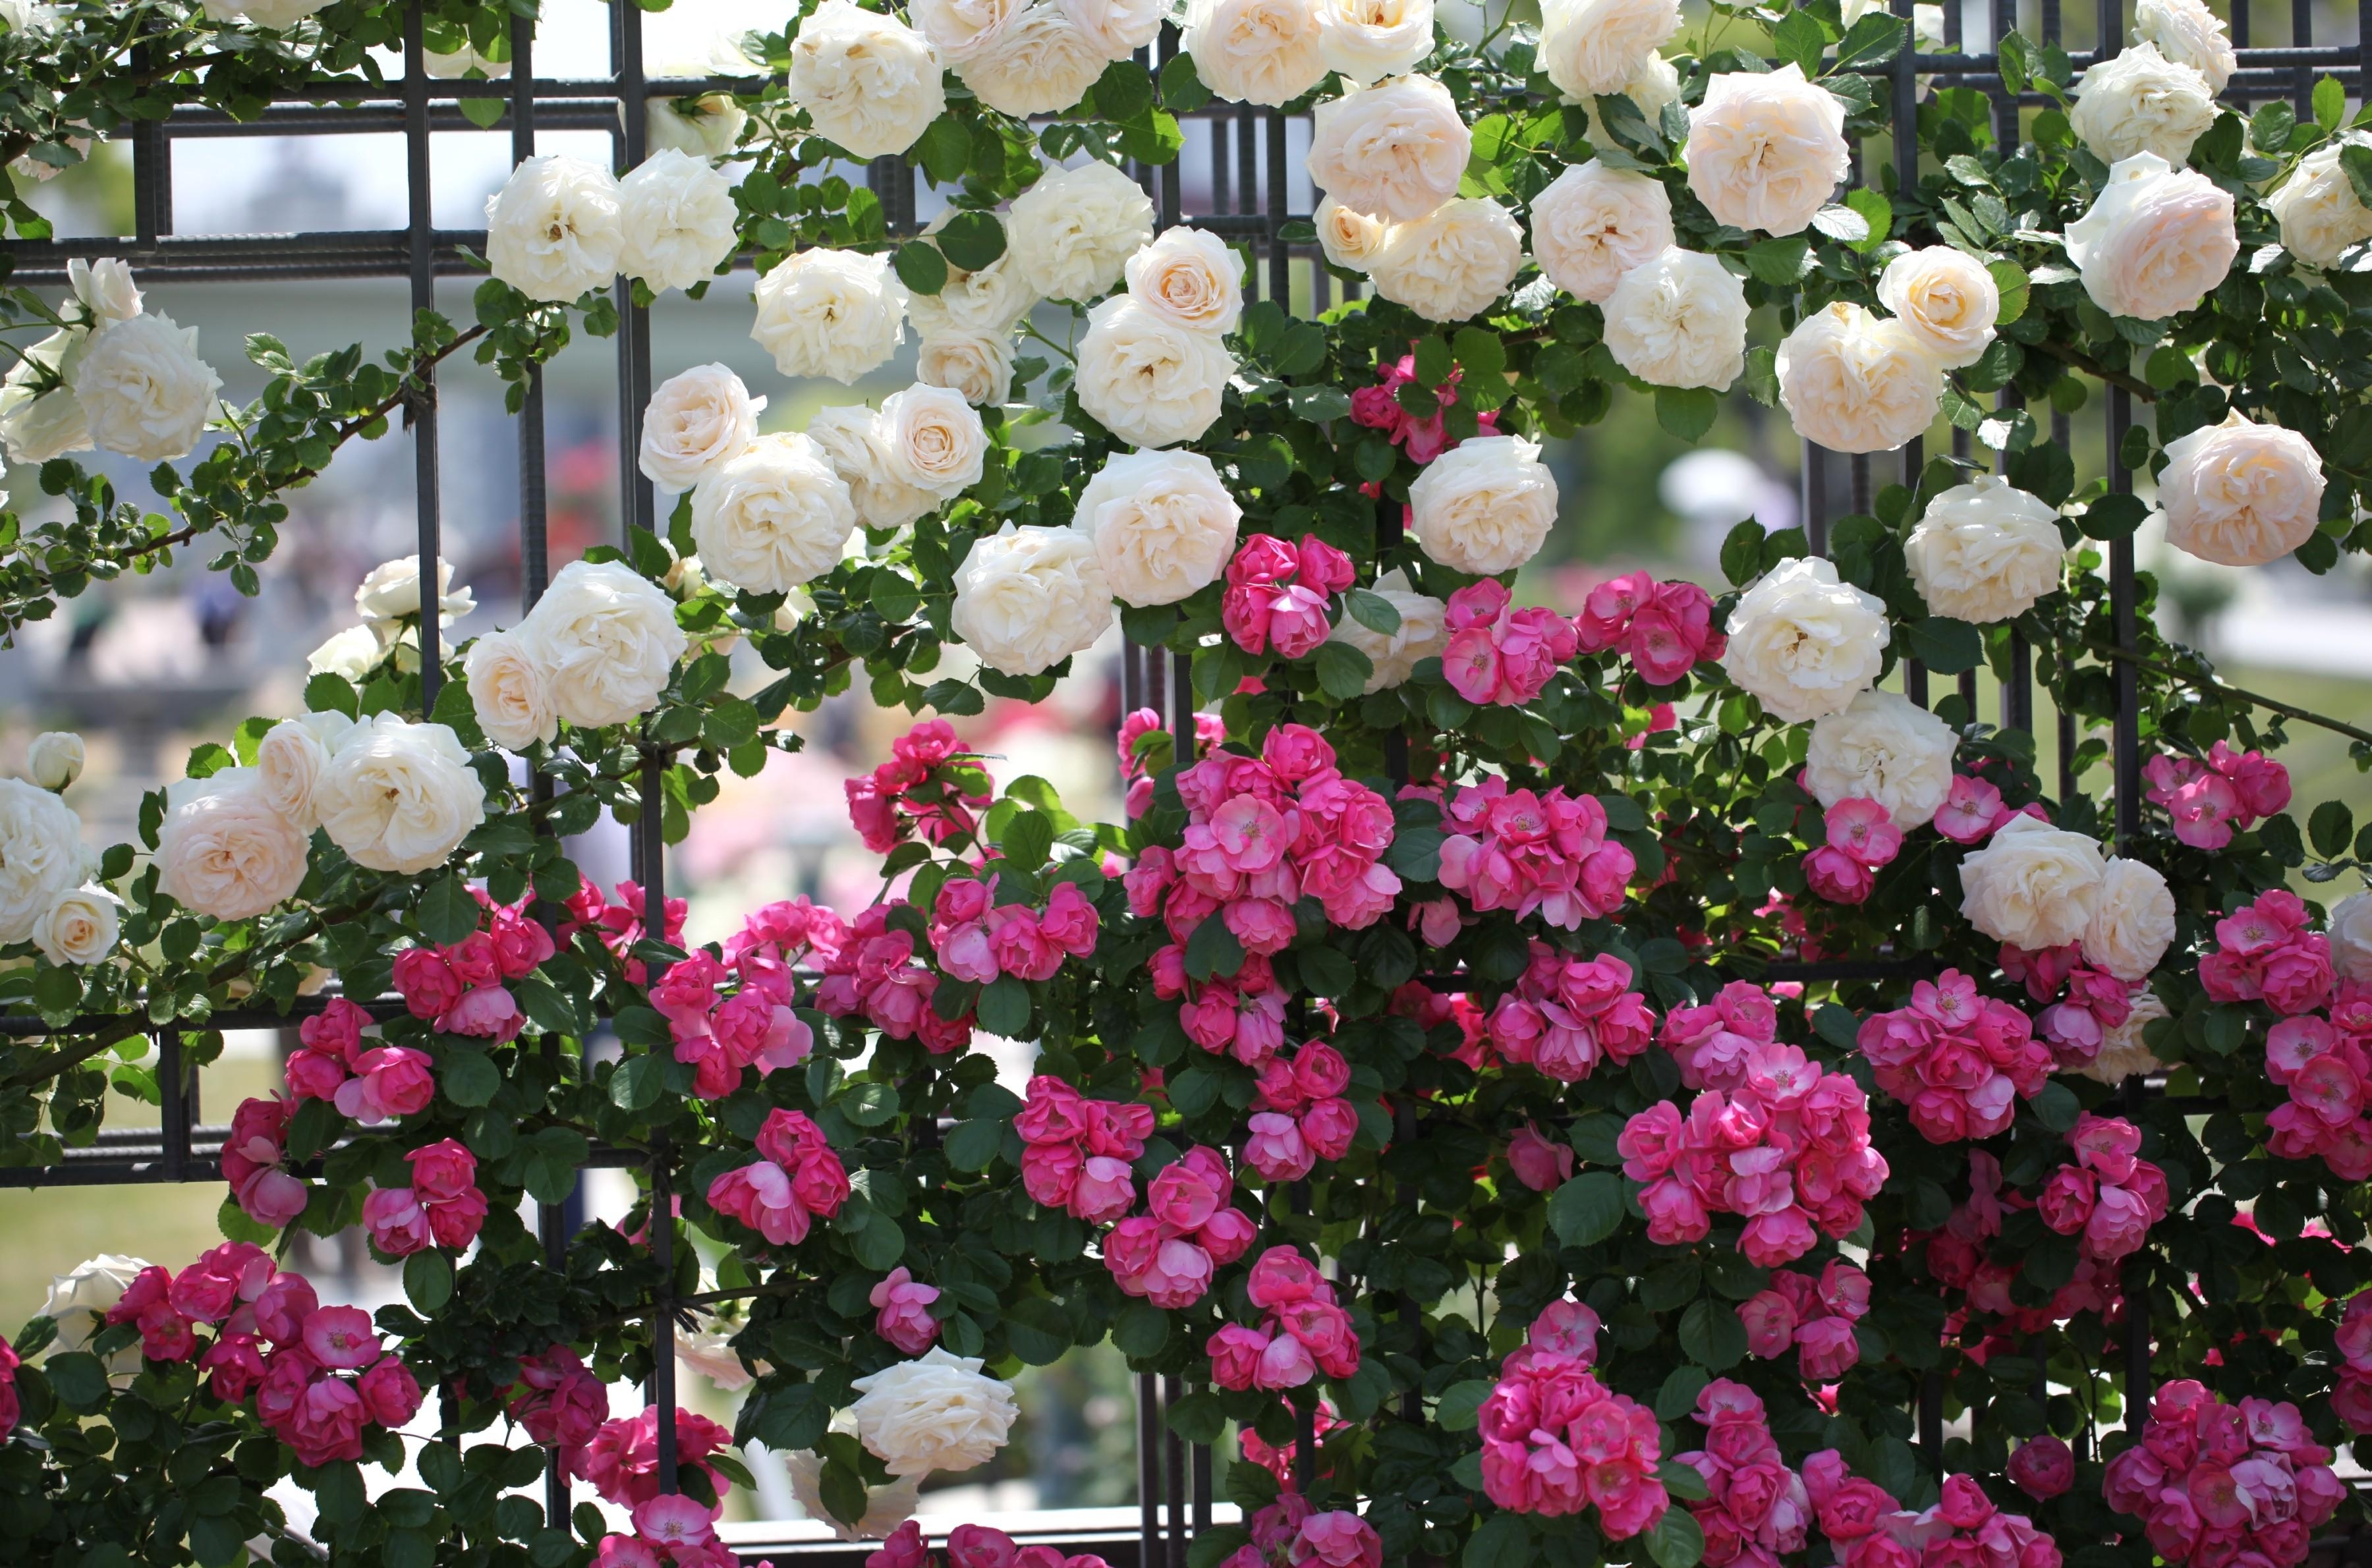 it's beautiful, roses, flowers, greens, fence, handsomely, different phone wallpaper